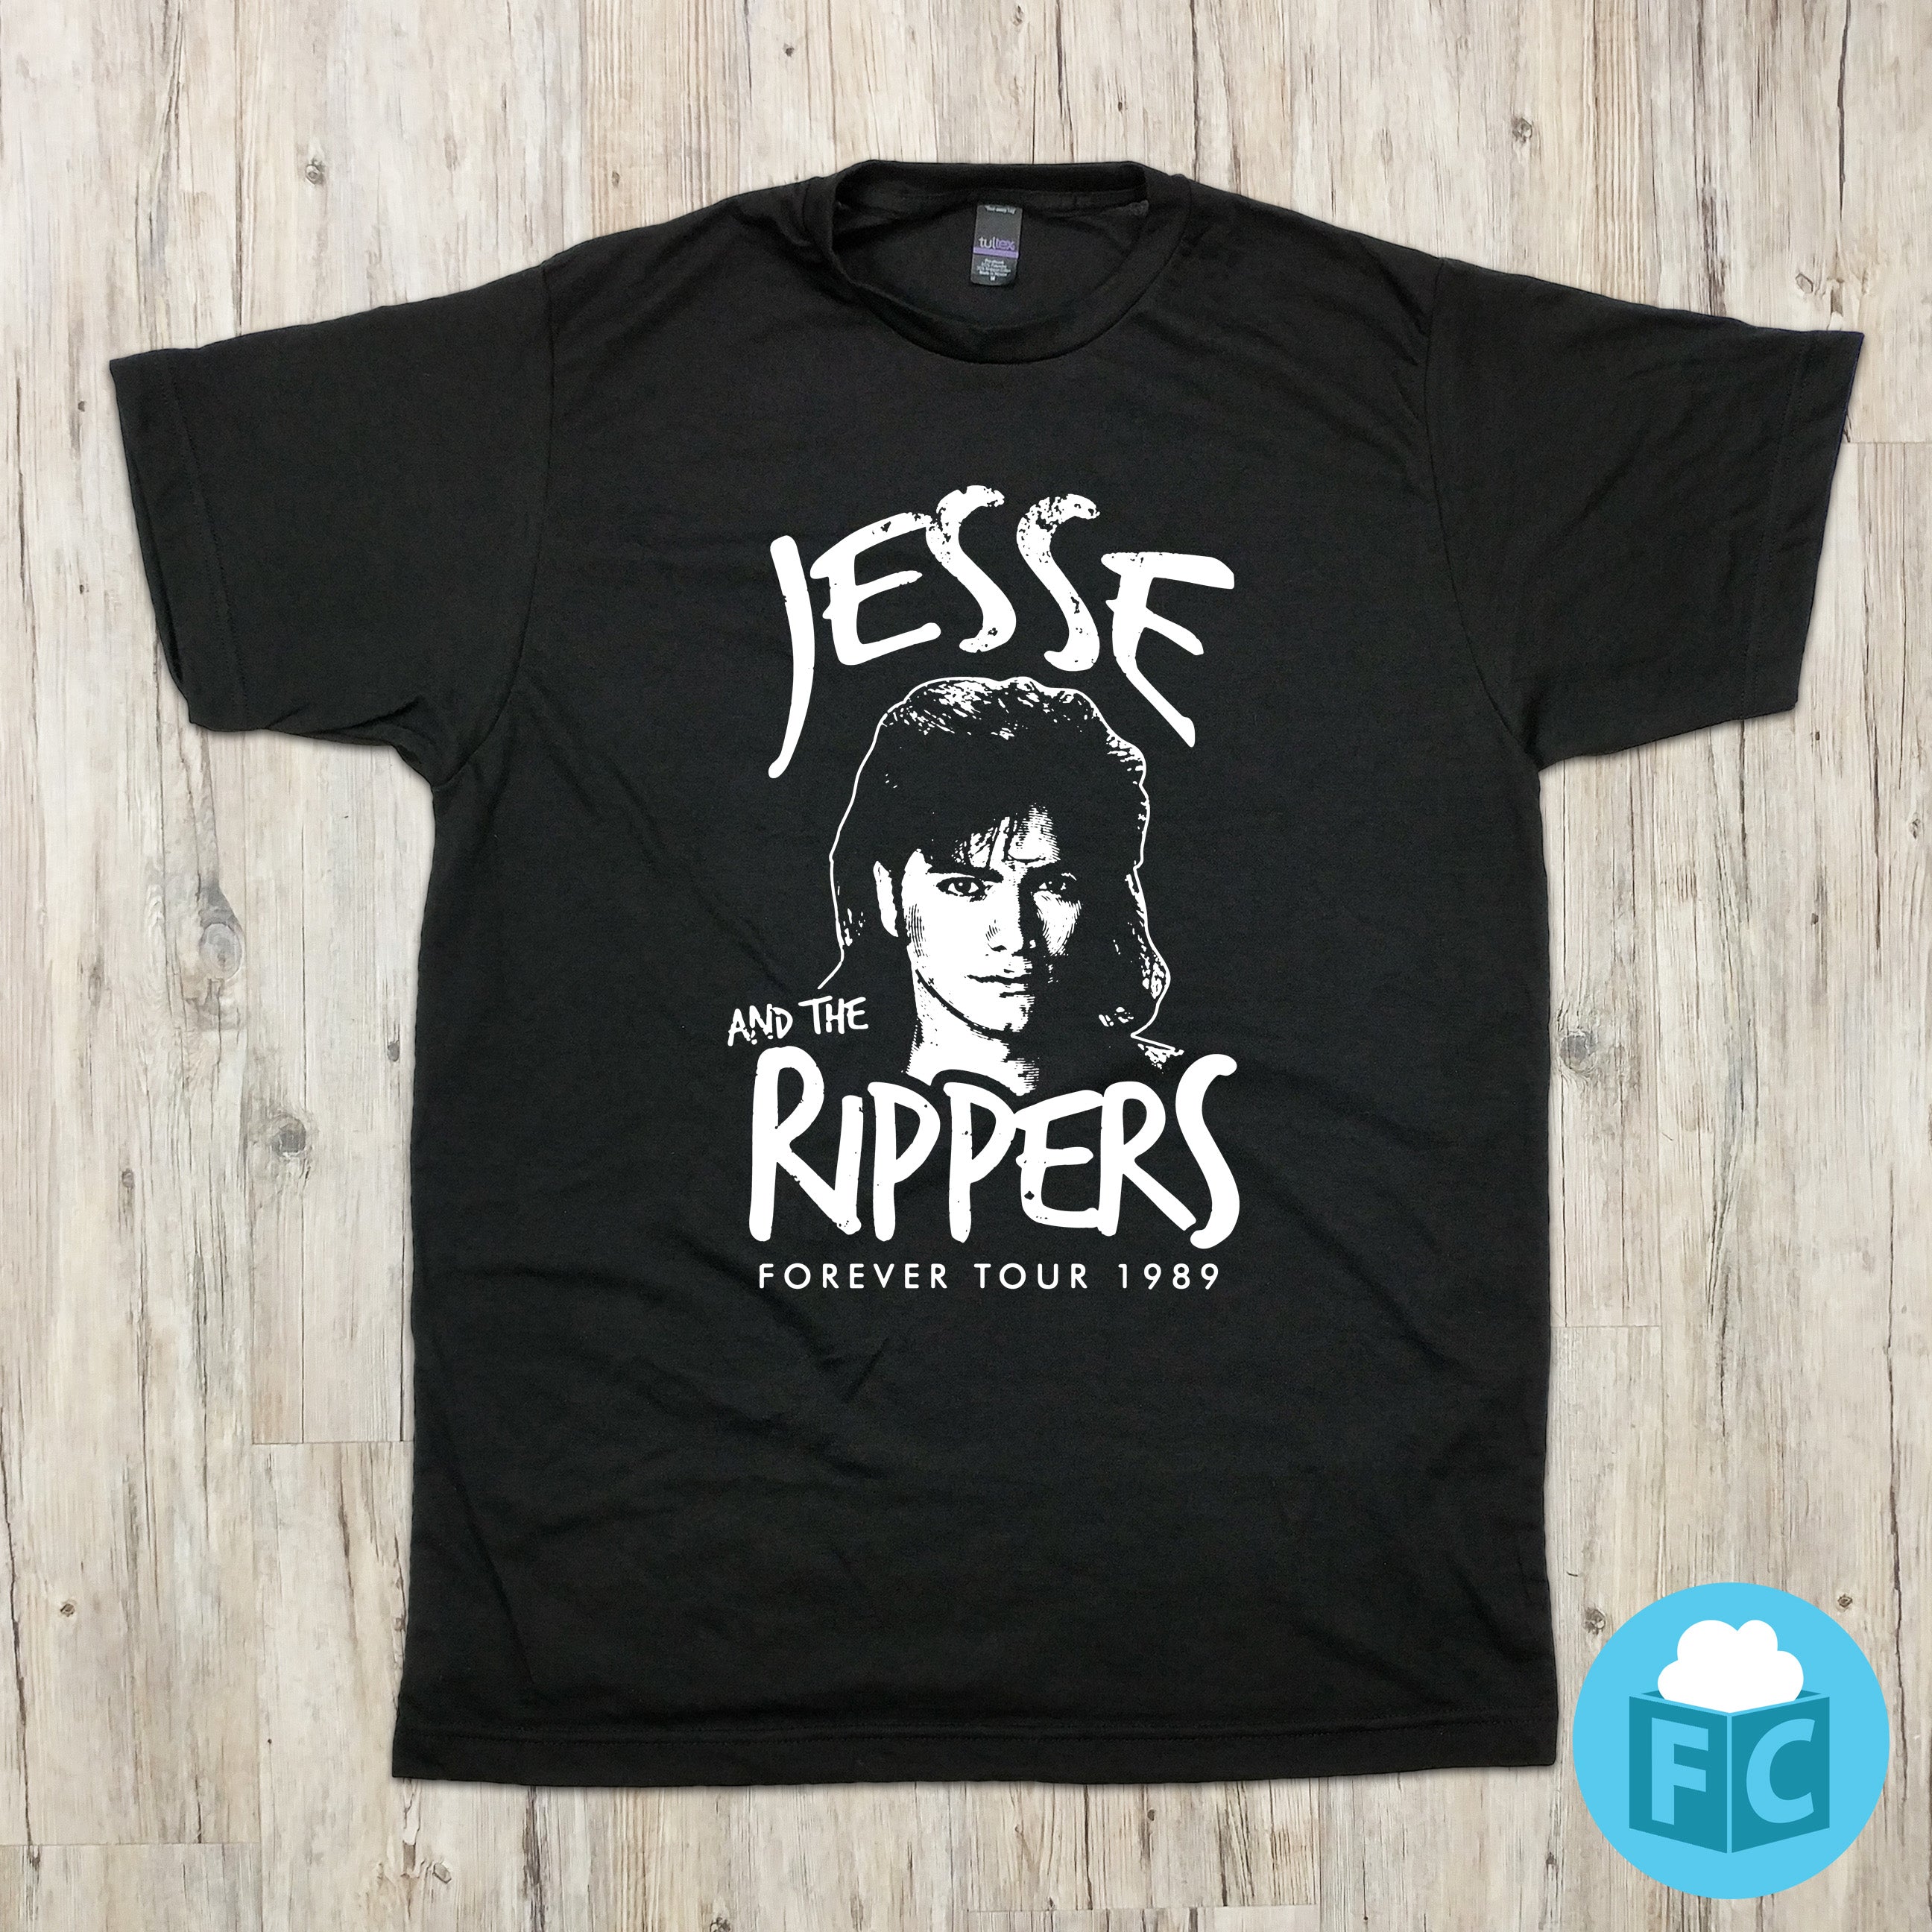 Jesse and the Rippers | TV Show Apparel | Fluffy Crate - fluffycrate